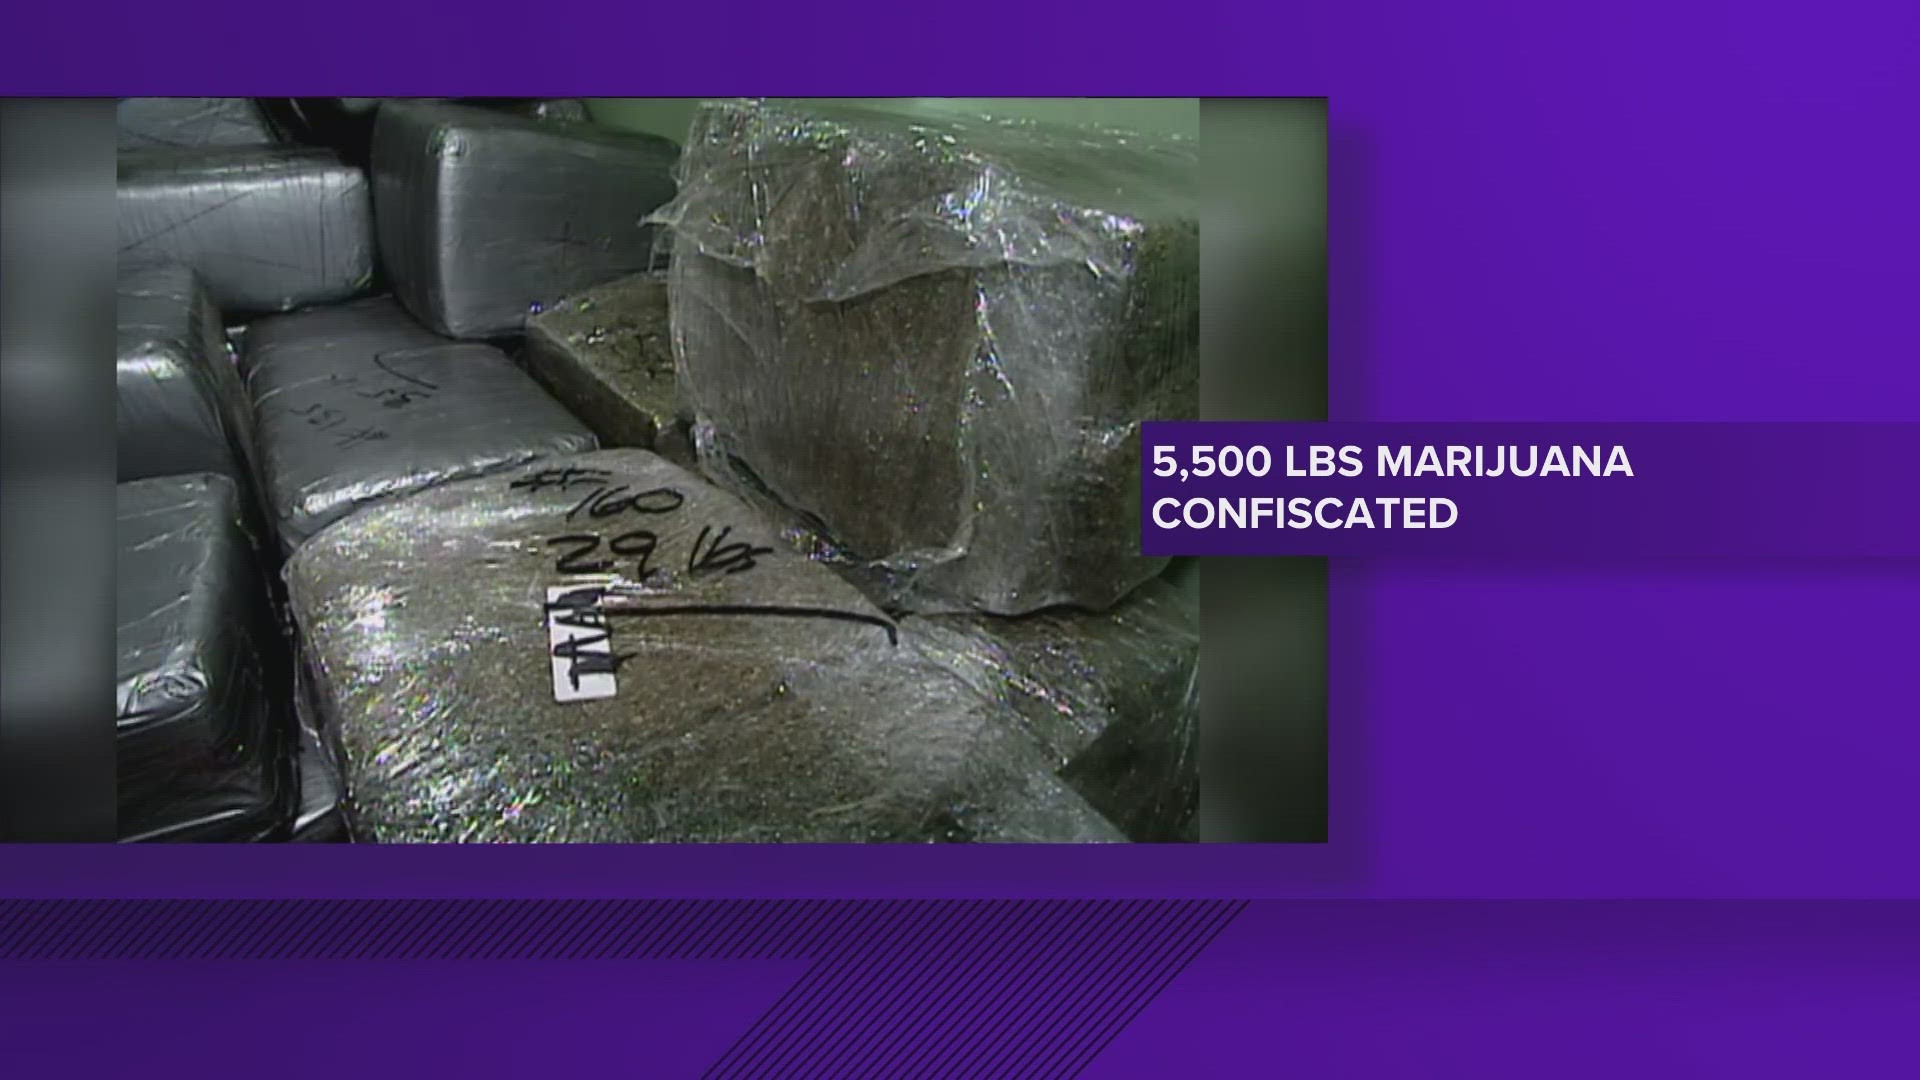 Do you remember the time when 3,000 pounds of marijuana were stolen from the Chatham County Sheriff's Office?